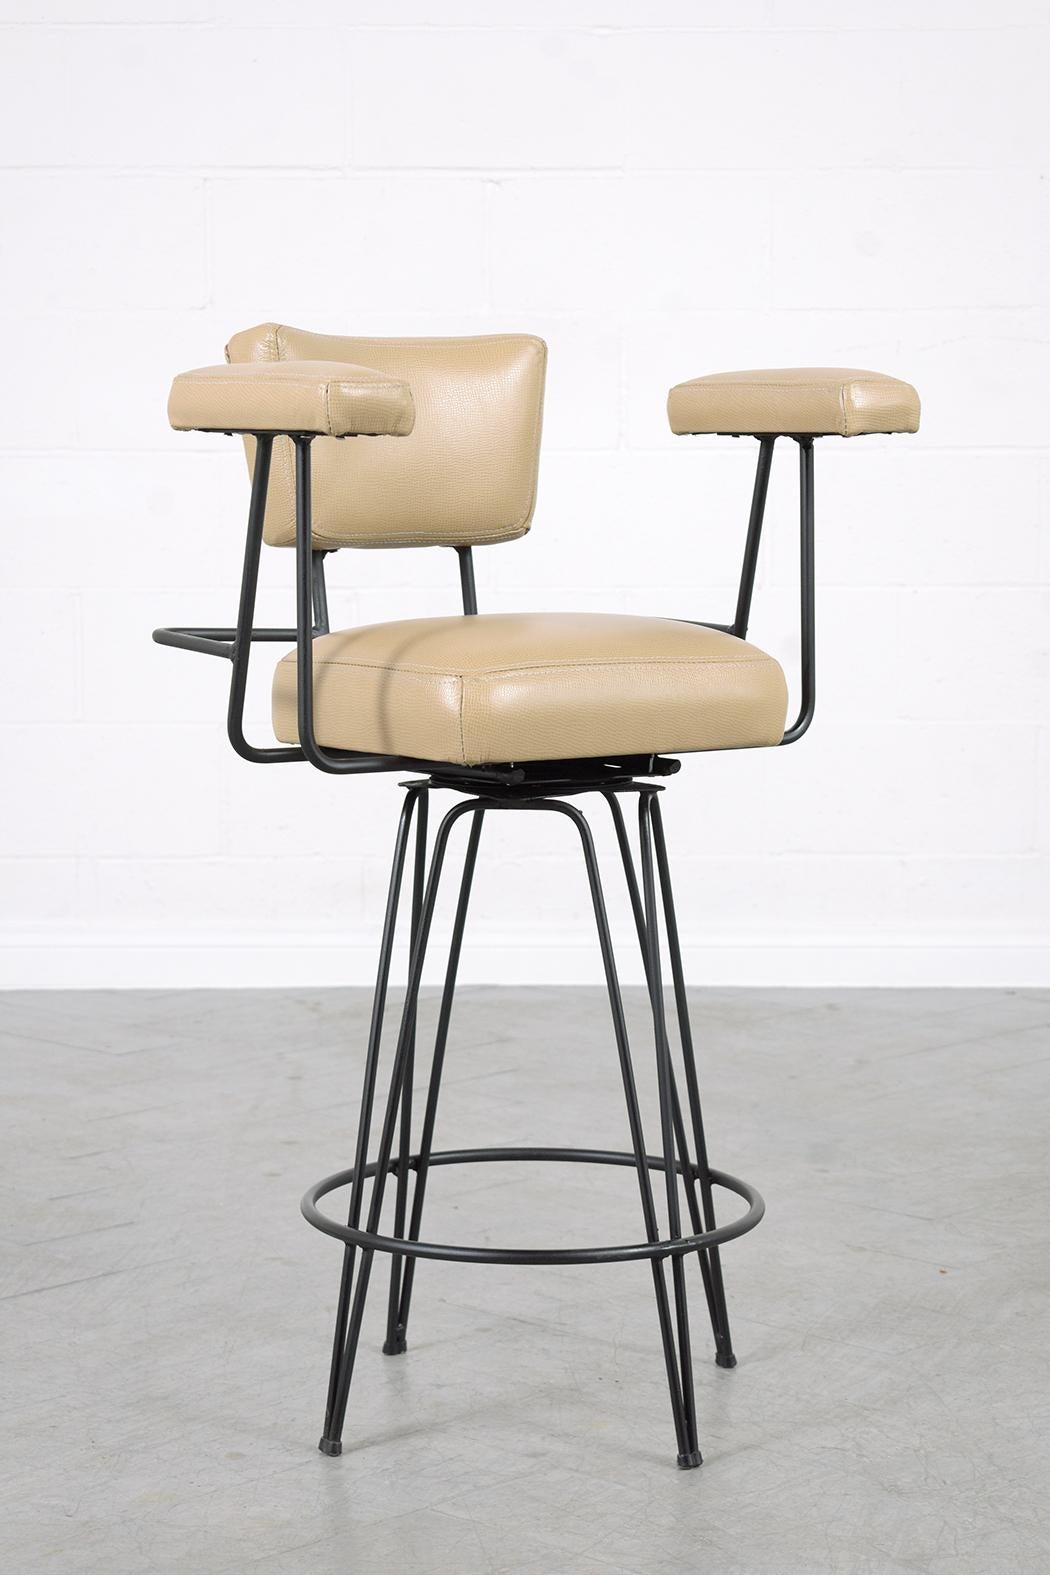 Restored 1970s Mid-Century Modern Swivel Barstools in Beige Leather For Sale 1